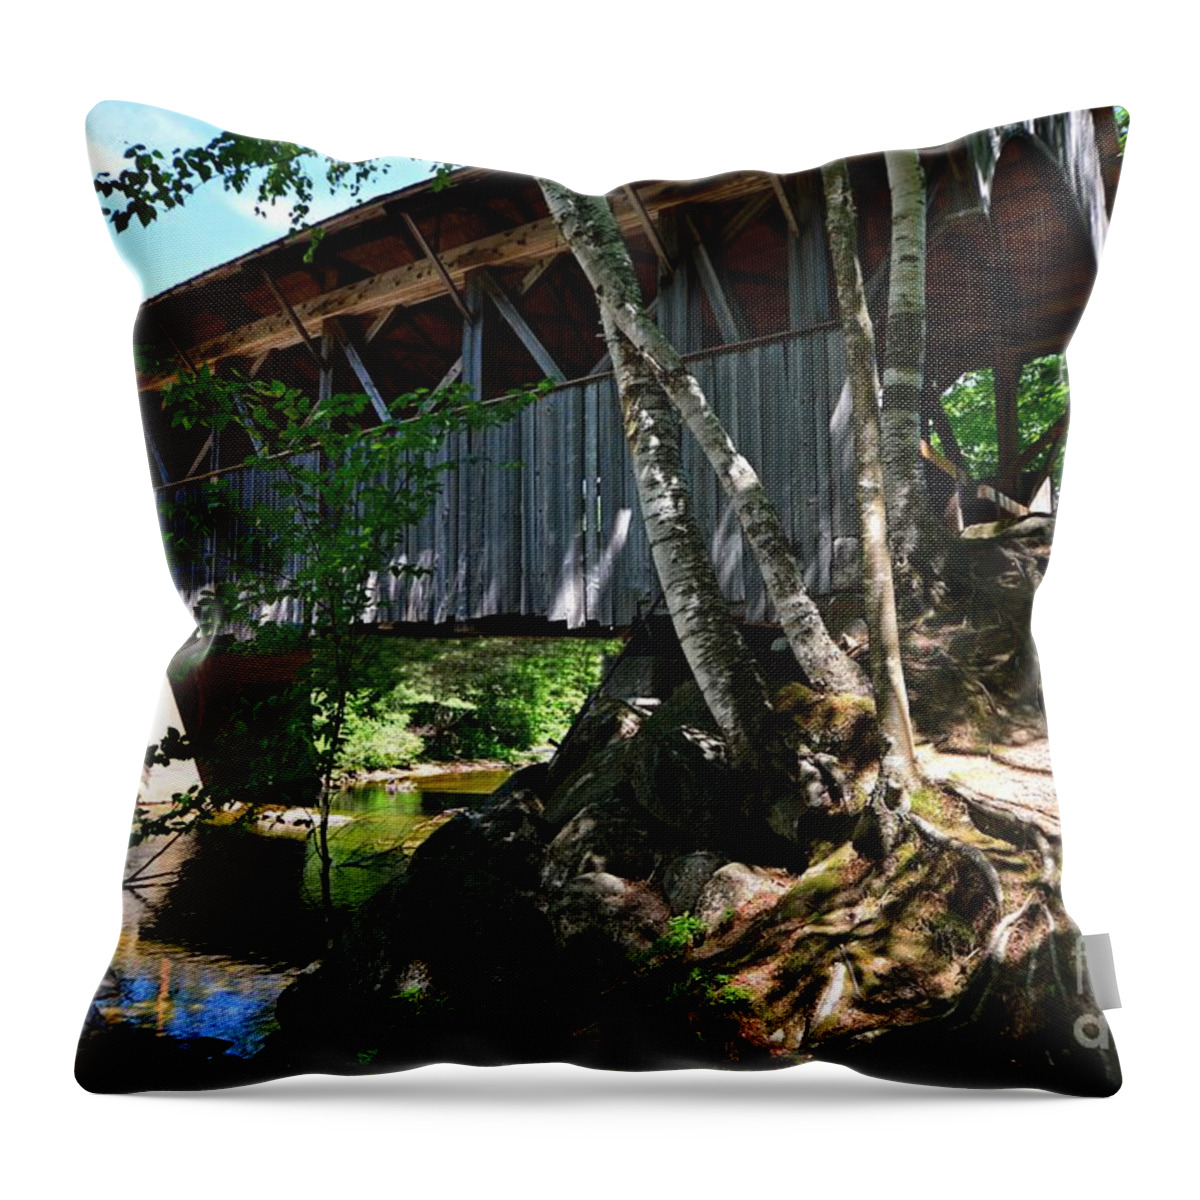 Maine Covered Bridge Throw Pillow featuring the photograph Maine Covered Bridge by Steve Brown